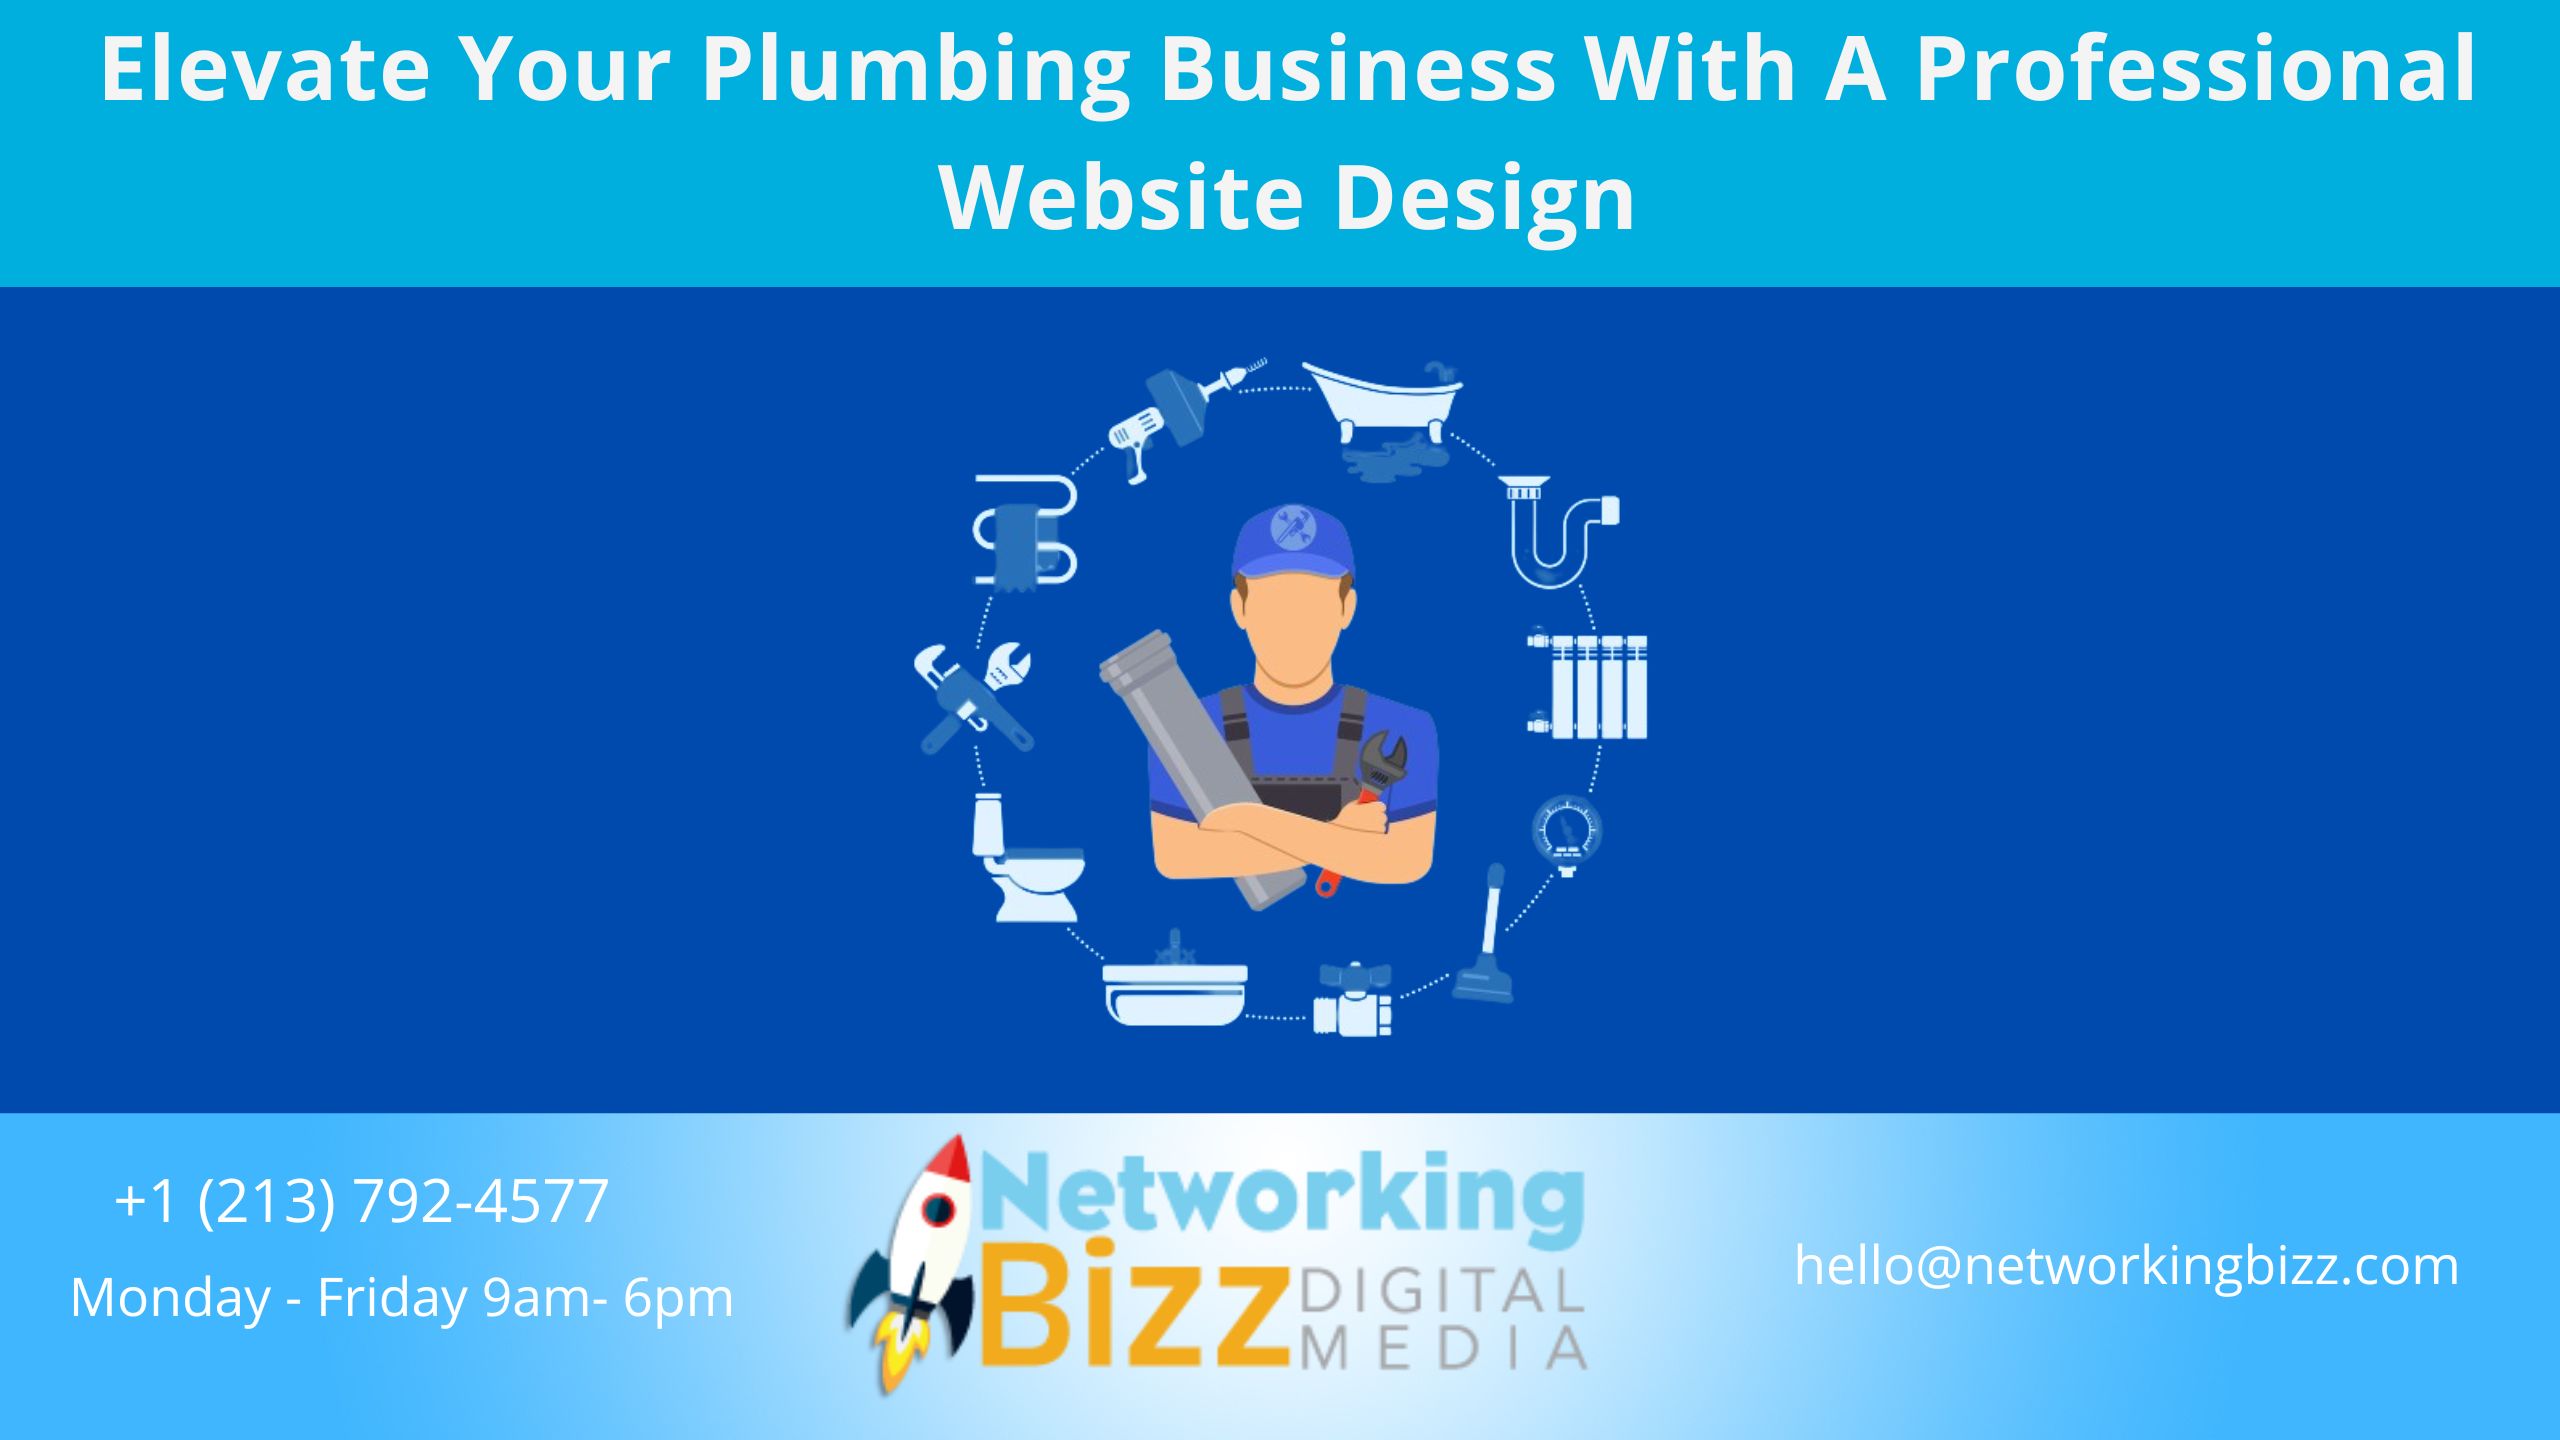 Elevate Your Plumbing Business With A Professional Website Design